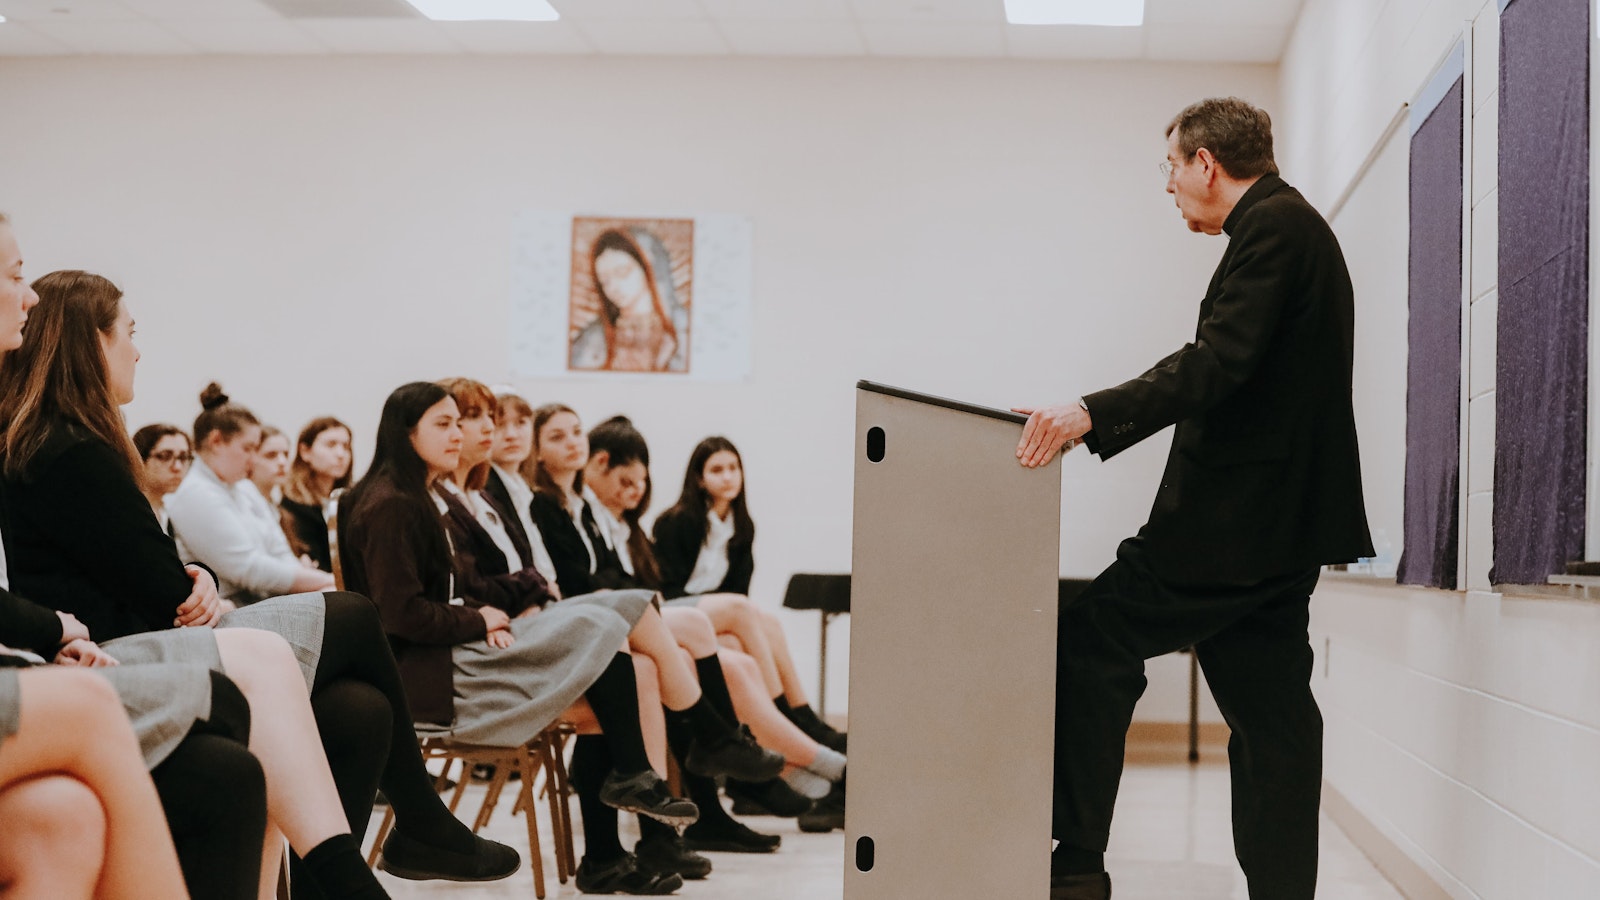 Archbishop Vigneron leads a question-and-answer session with students at St. Catherine of Siena Academy in Wixom during a pastoral visit to the school April 2, 2019. (Melissa Moon | Detroit Catholic file photo)